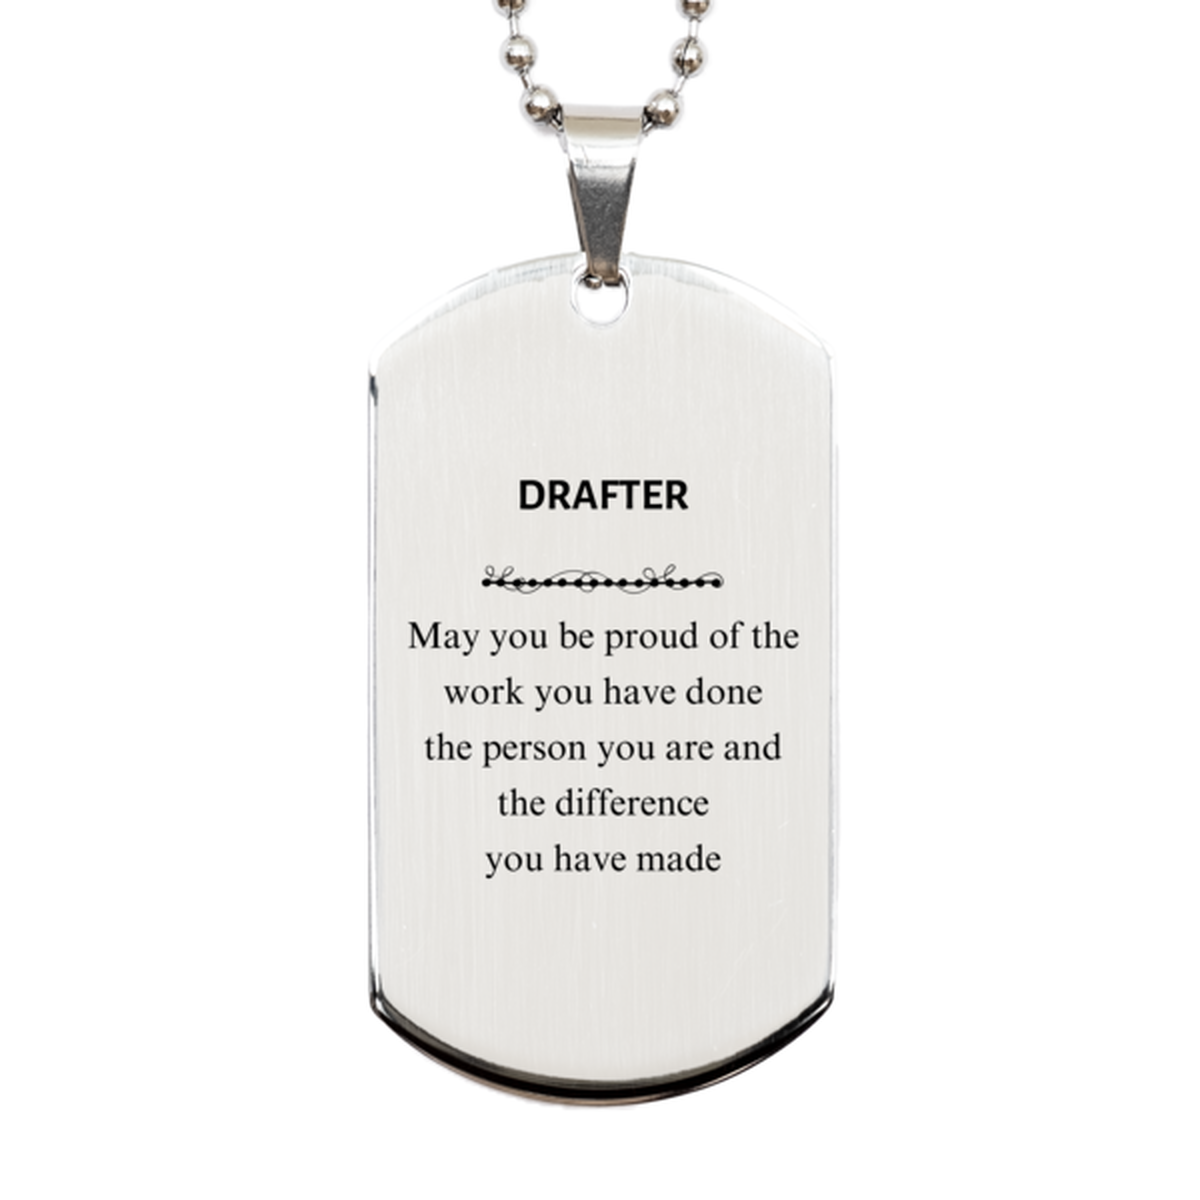 Drafter May you be proud of the work you have done, Retirement Drafter Silver Dog Tag for Colleague Appreciation Gifts Amazing for Drafter